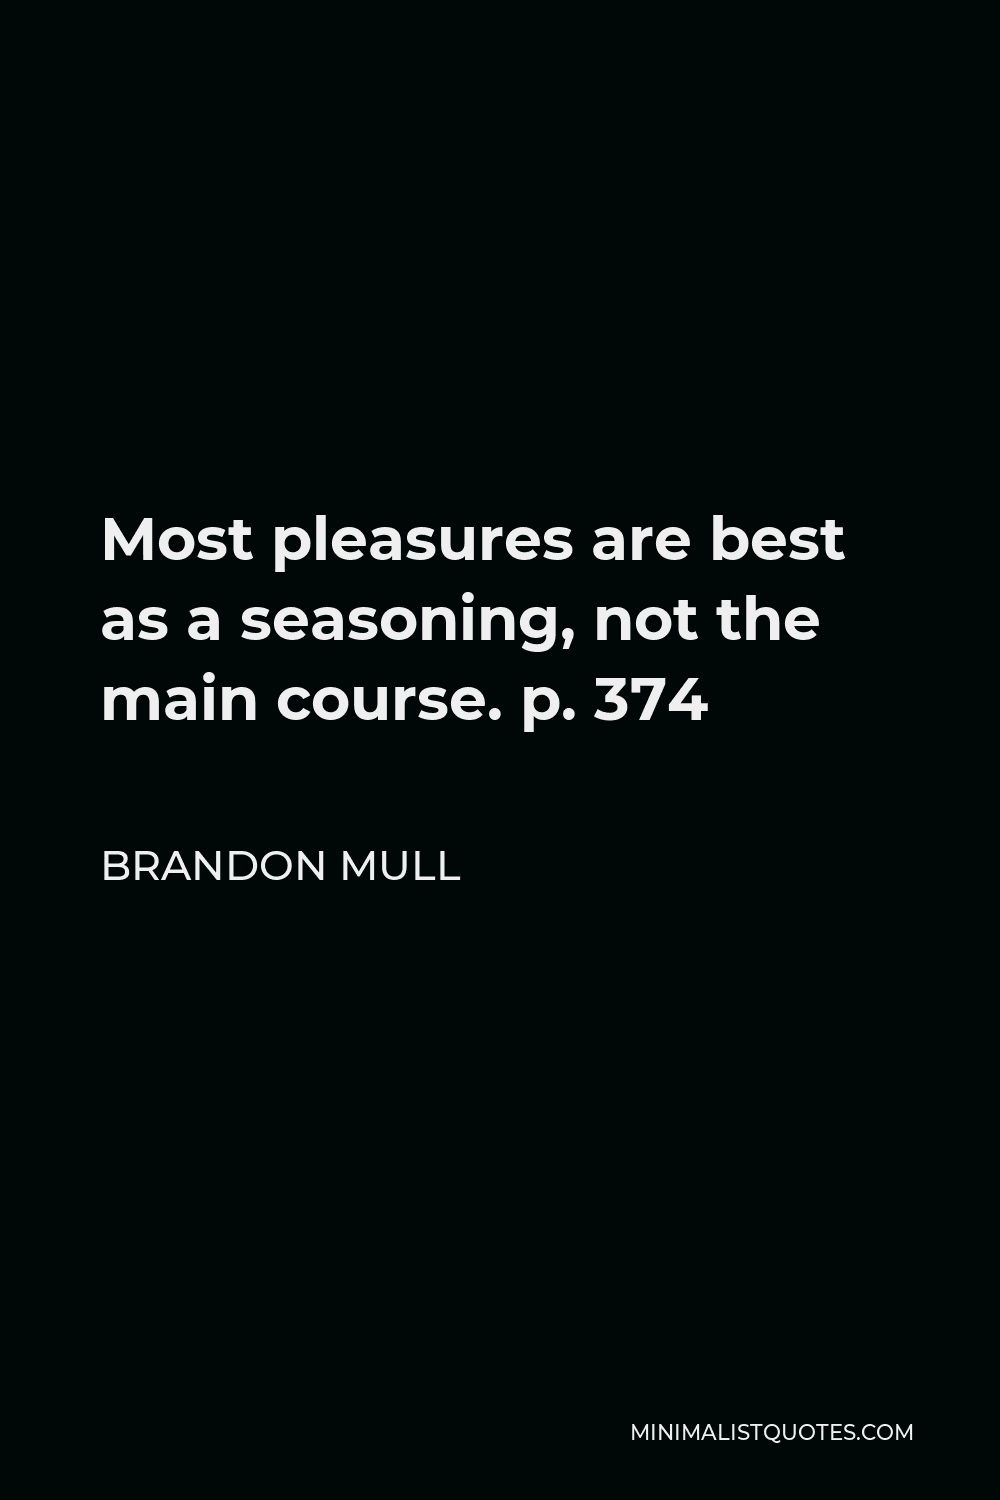 Brandon Mull Quote - Most pleasures are best as a seasoning, not the main course. However you try to disguise it, you end up feeding without being nourished.